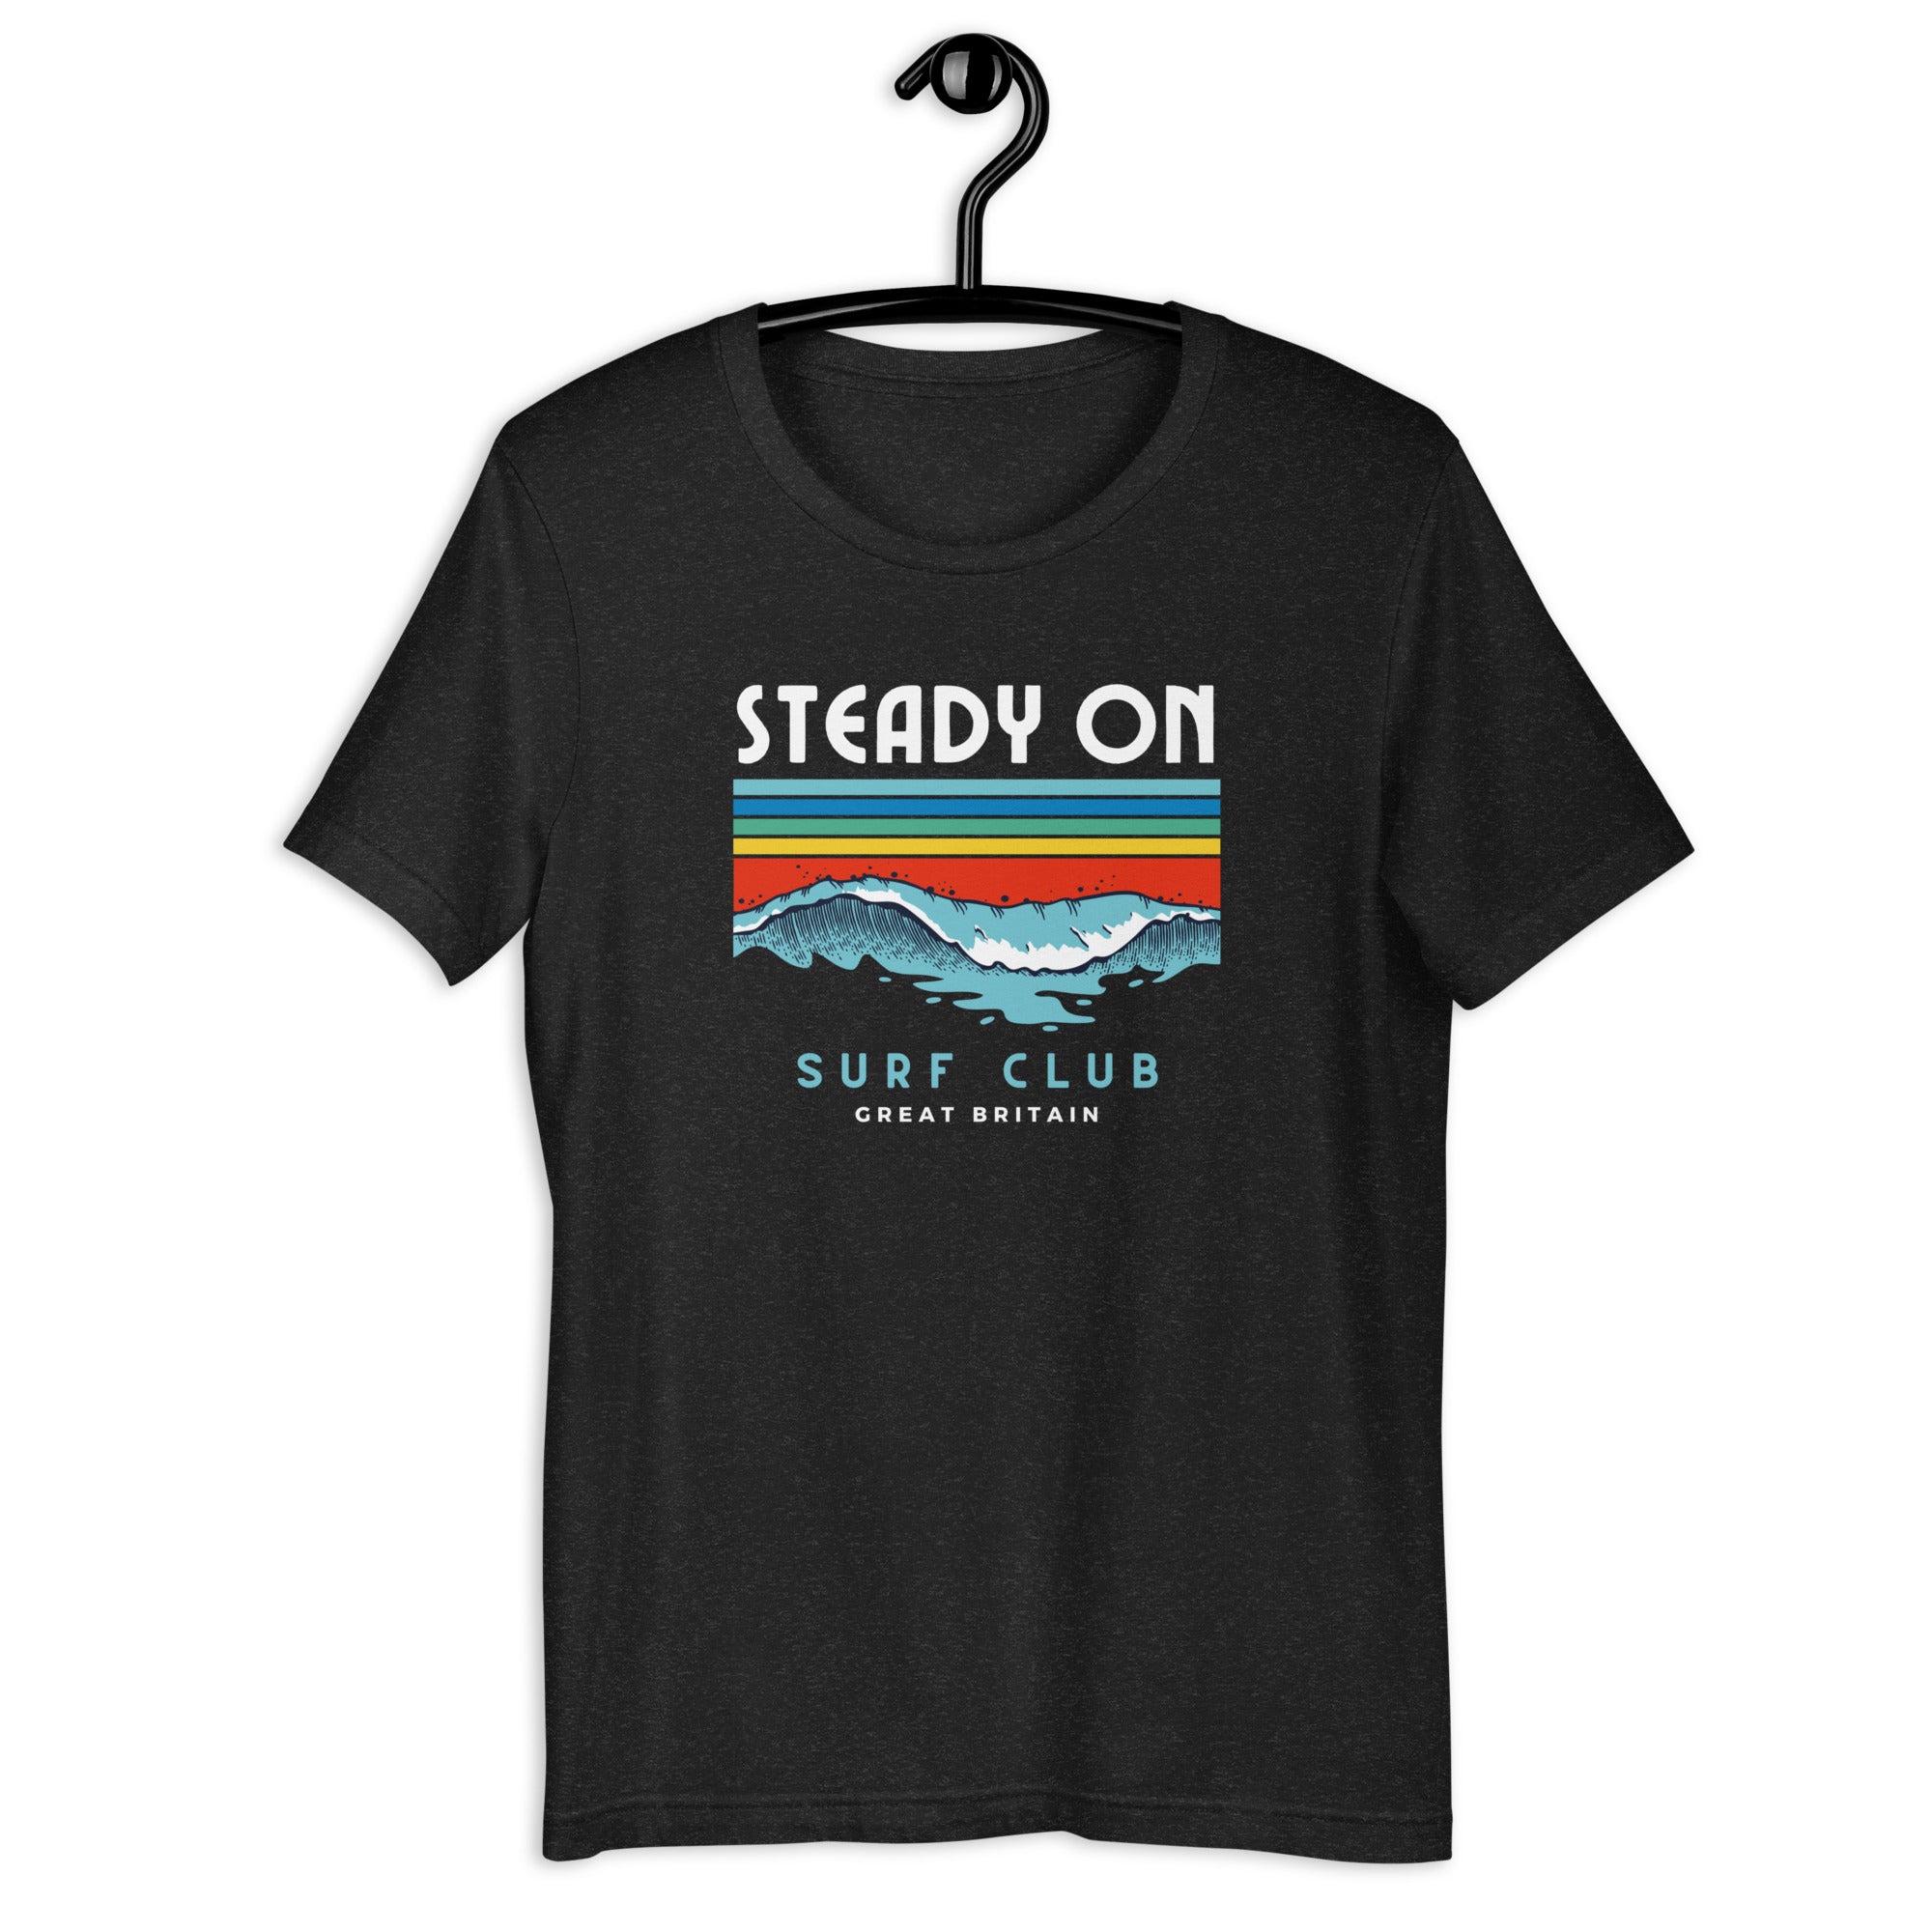 Steady On Surf Club Great Britain 70s Wave T-shirt